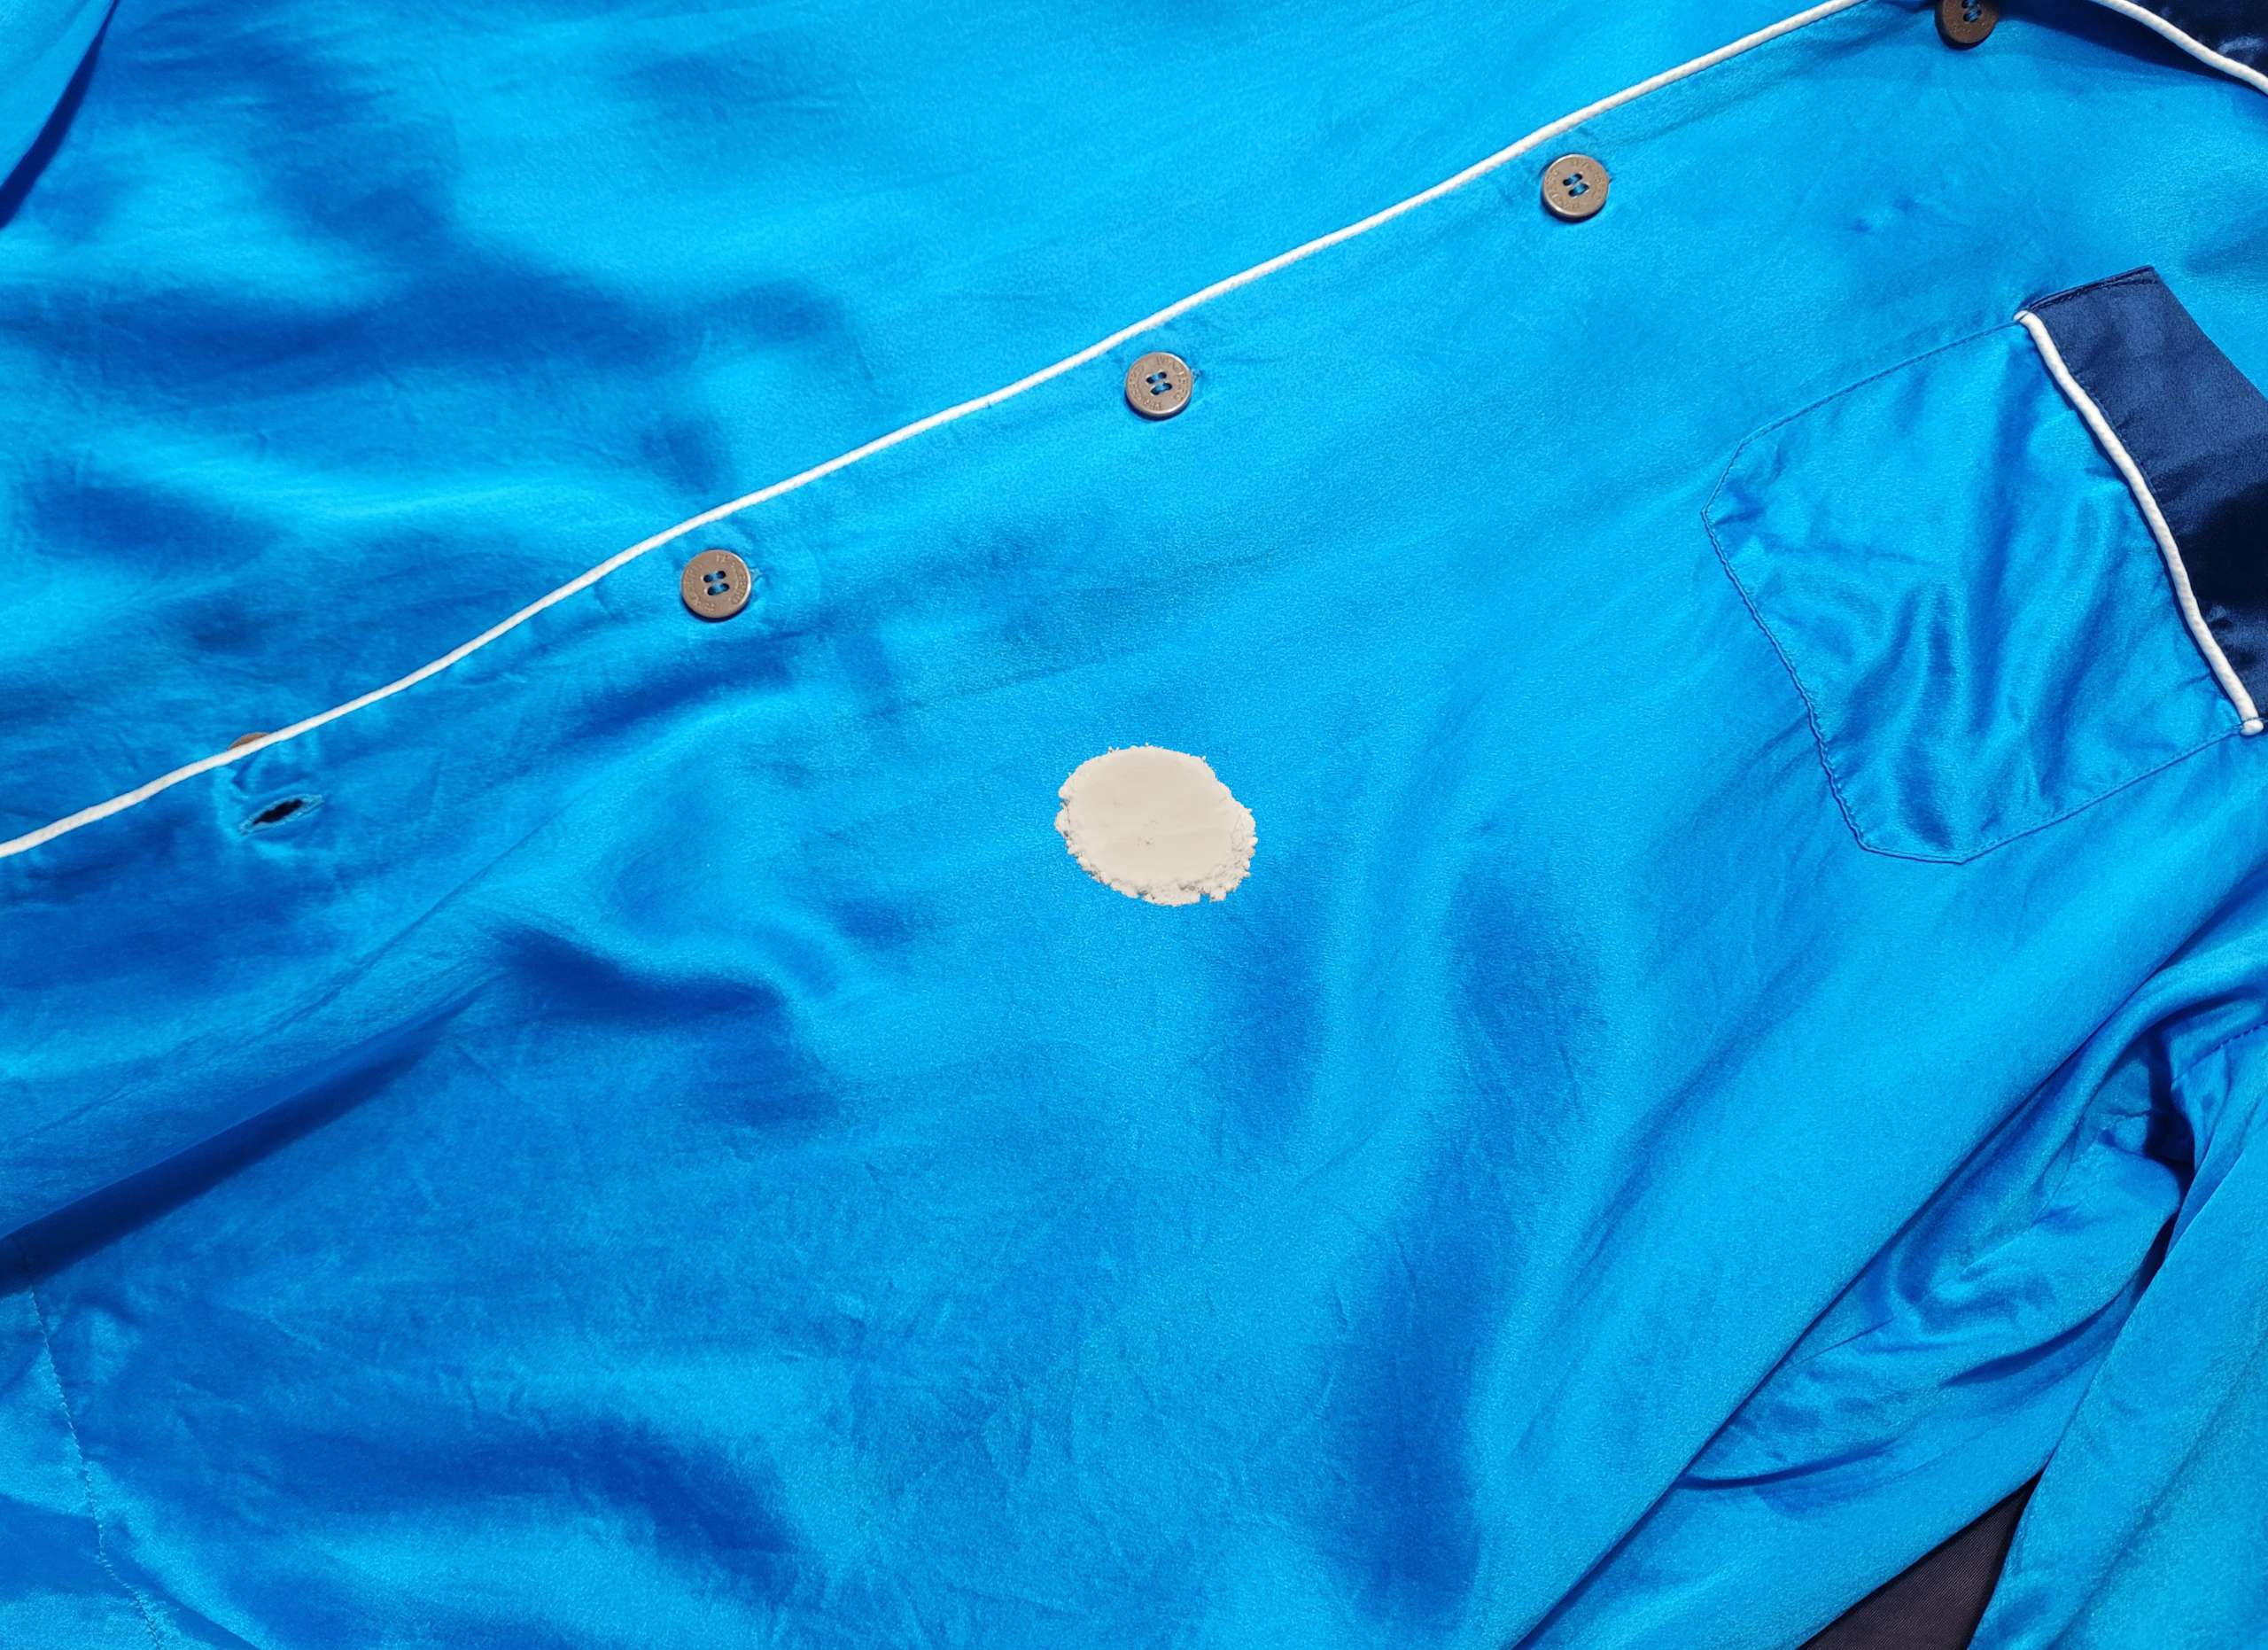 photo of baking soda being applied to a stain on satin pajamas